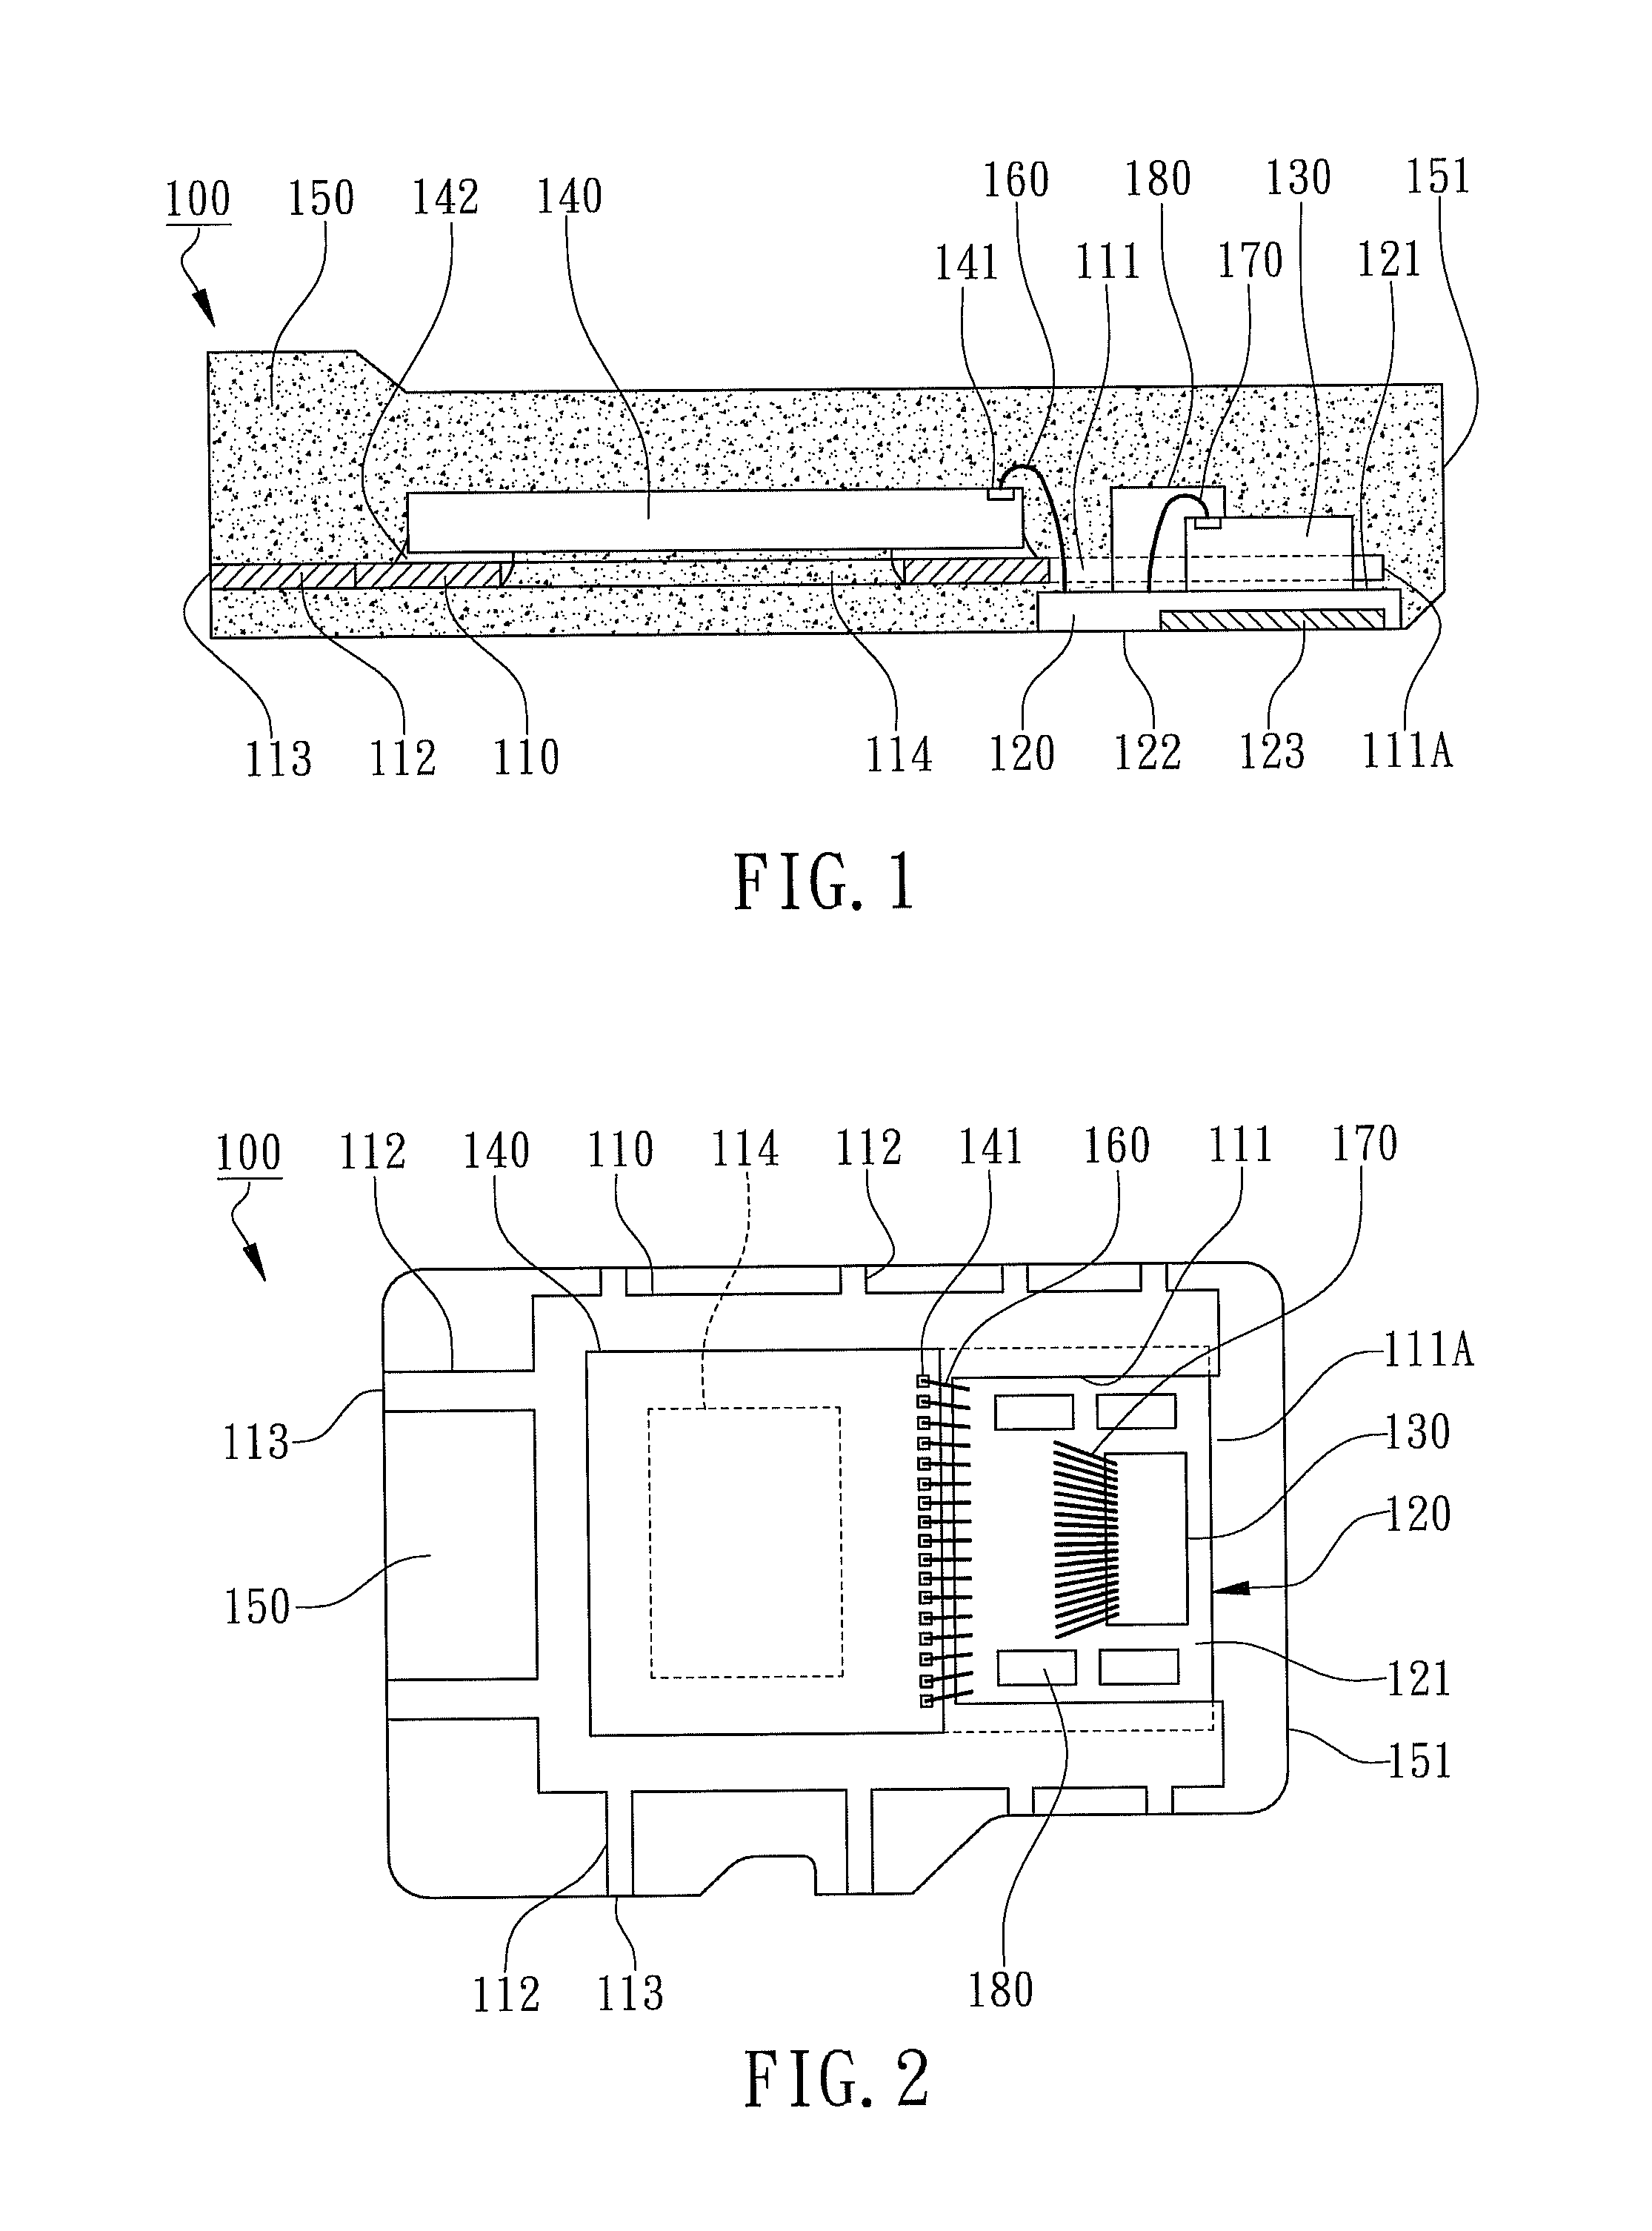 Multi-chip memory package with a small substrate